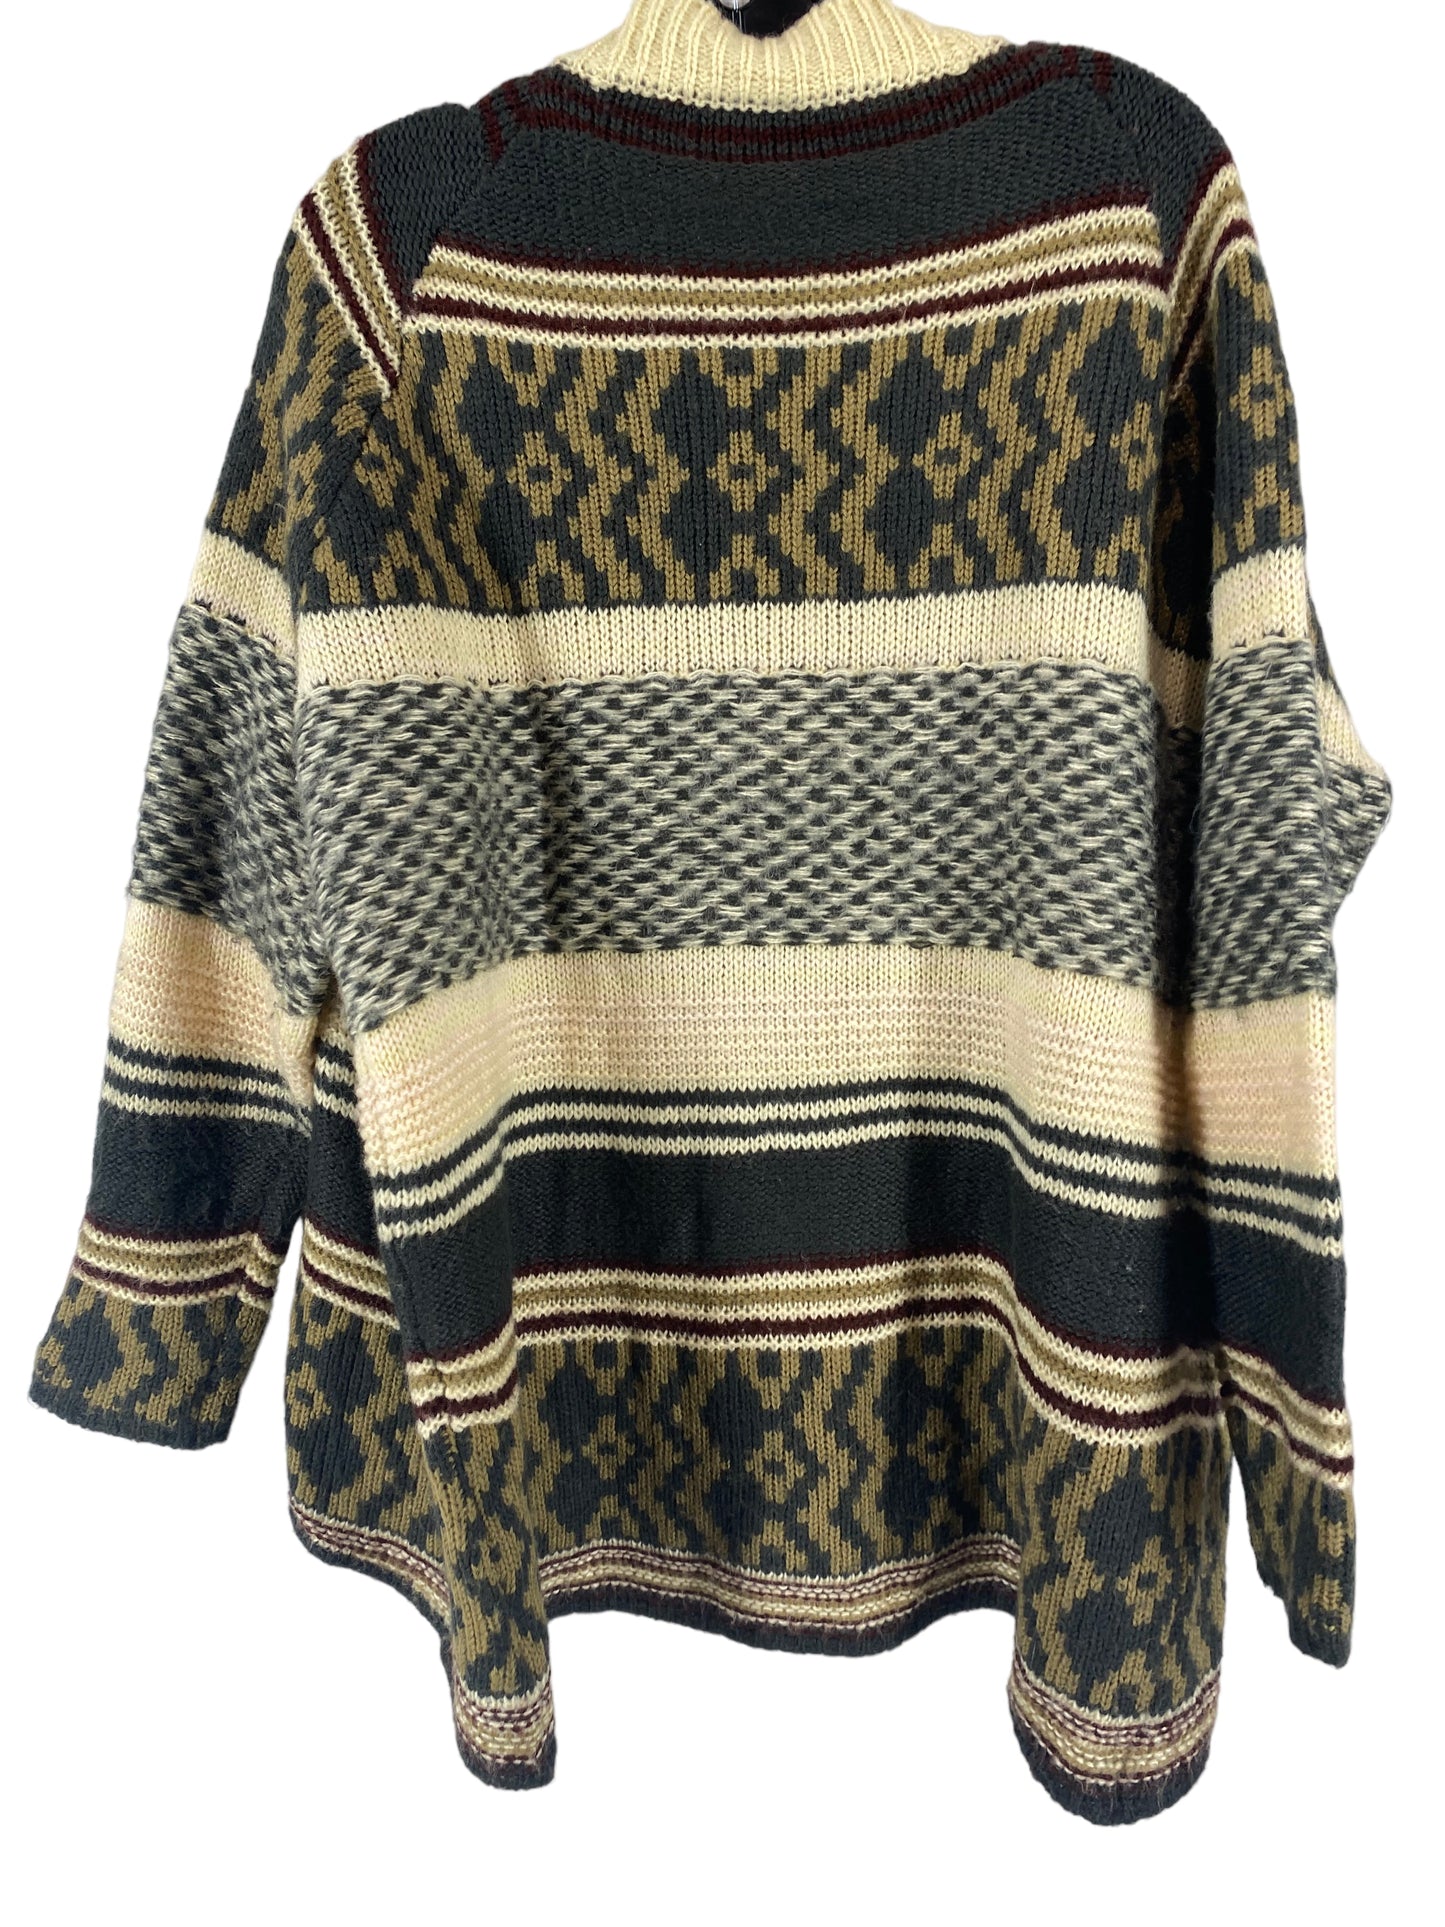 Sweater Cardigan By Quinn  Size: M